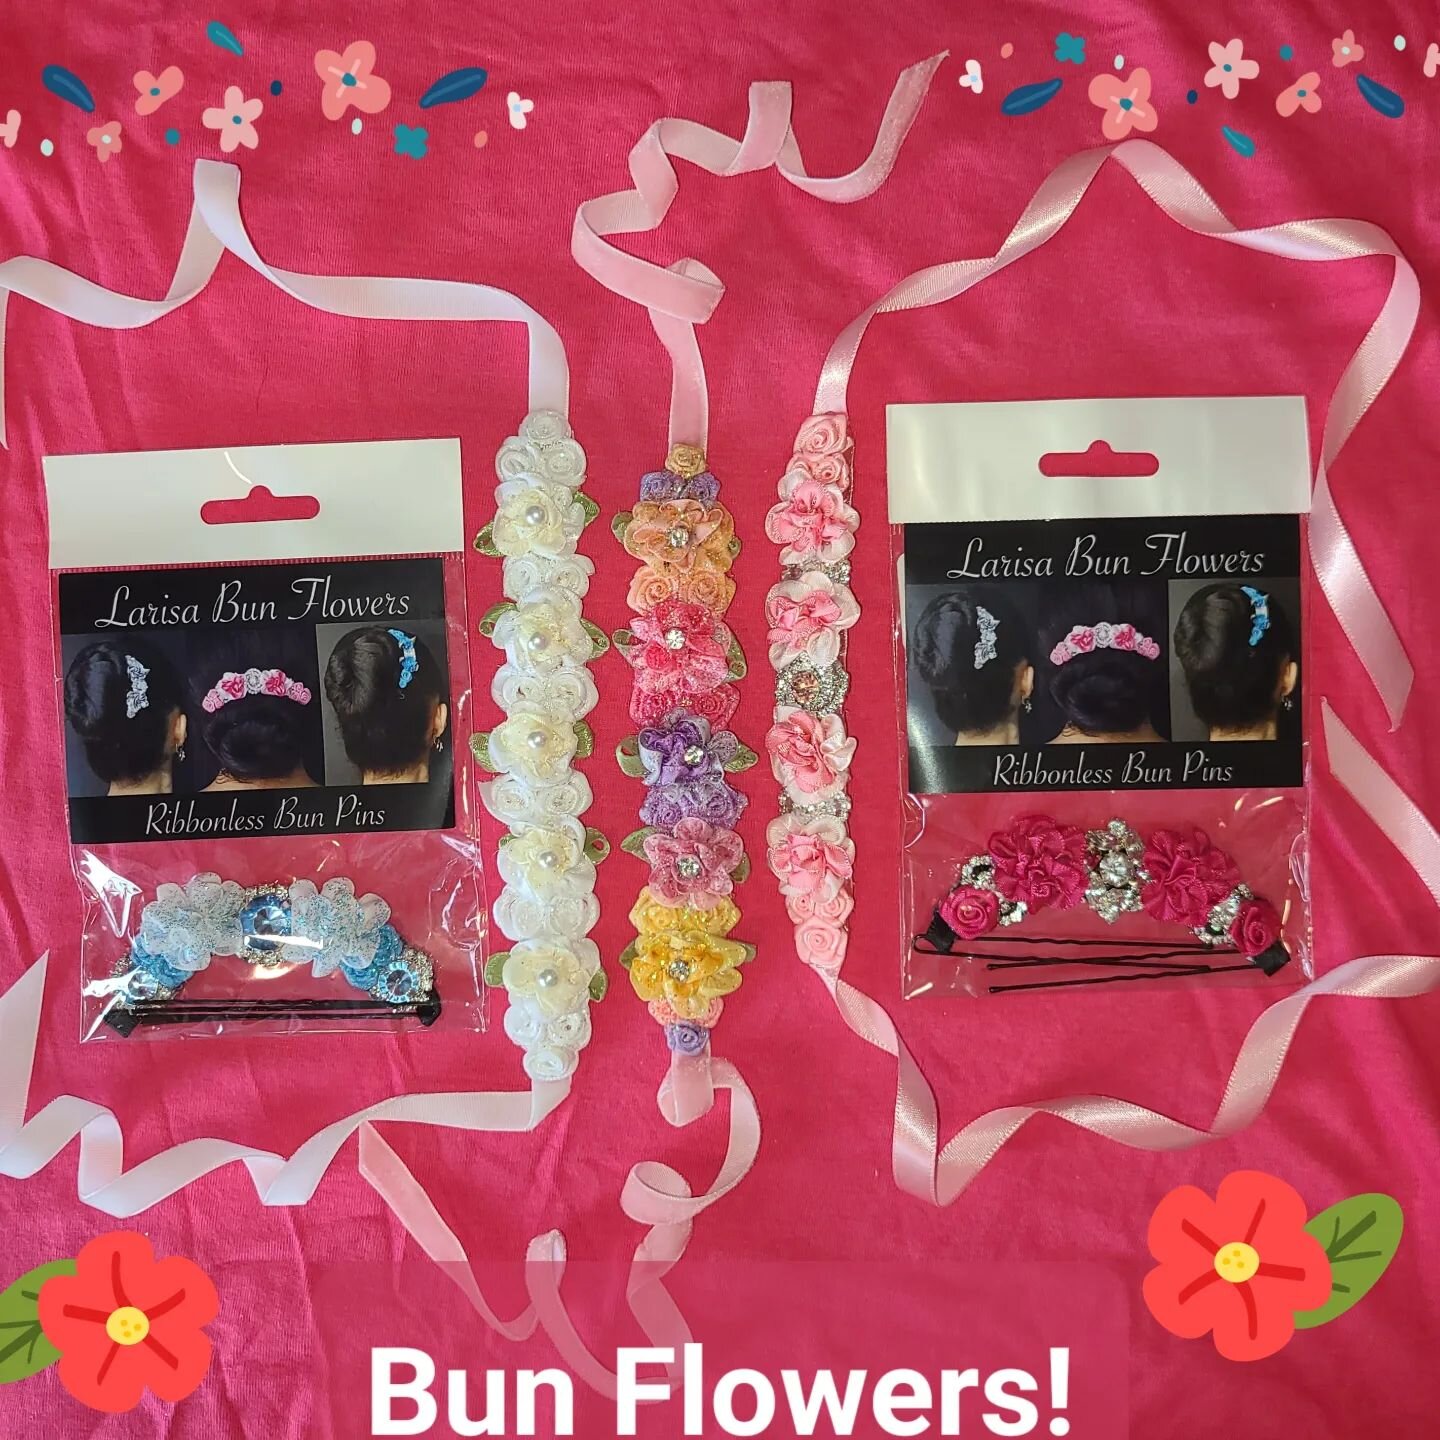 New bun flowers have arrived! With ribbons or pins. Accessorize your ballet outfit with some bling for your bun!

#BunFlowers #BalletBling #Ballet #TeamPointe